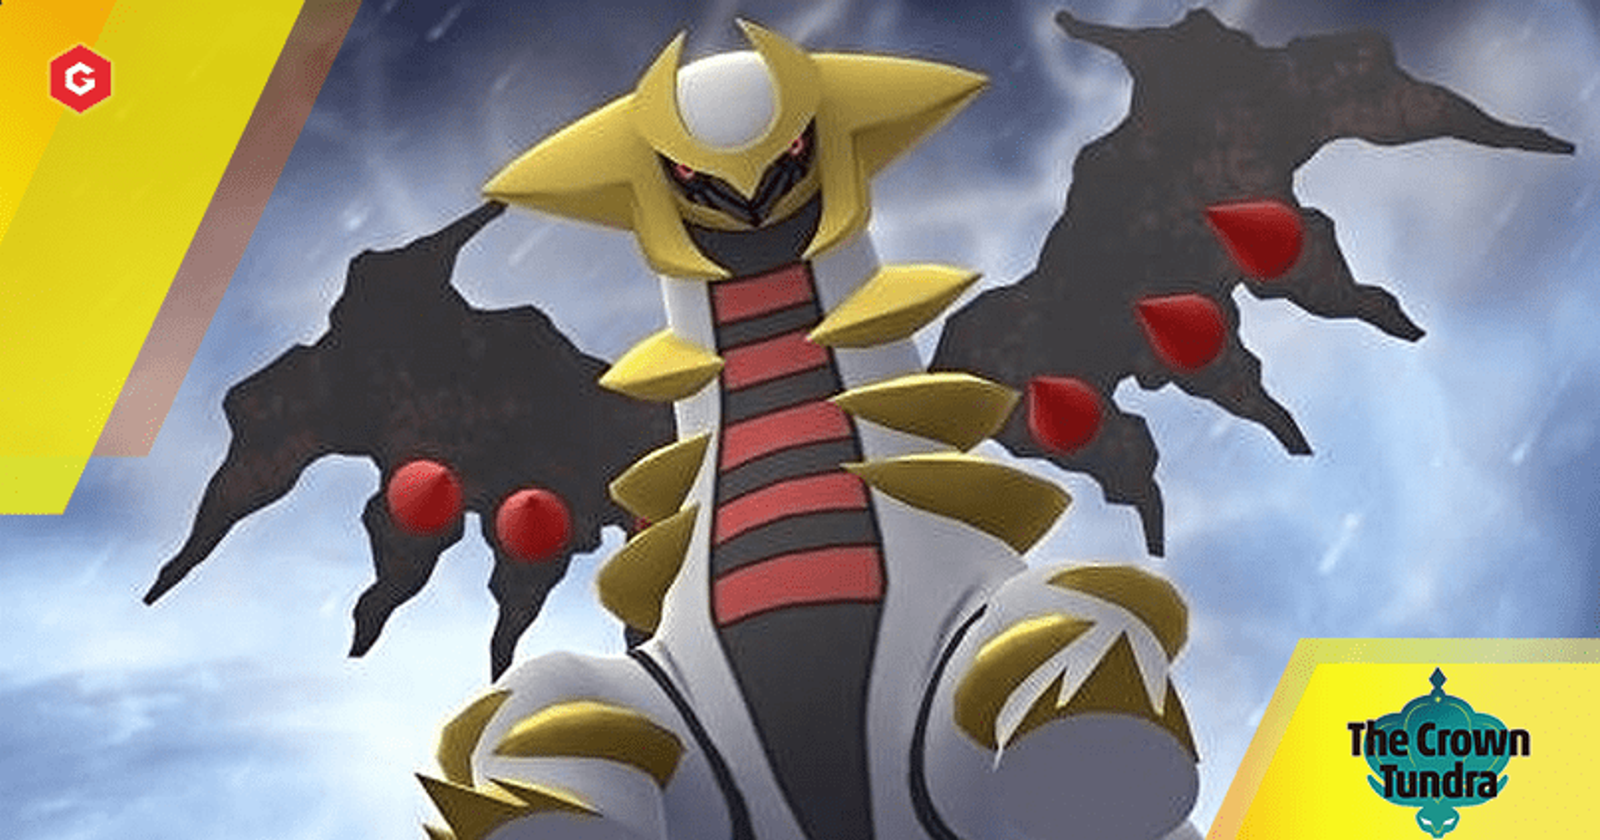 Giratina - Evolutions, Location, and Learnset, Crown Tundra DLC